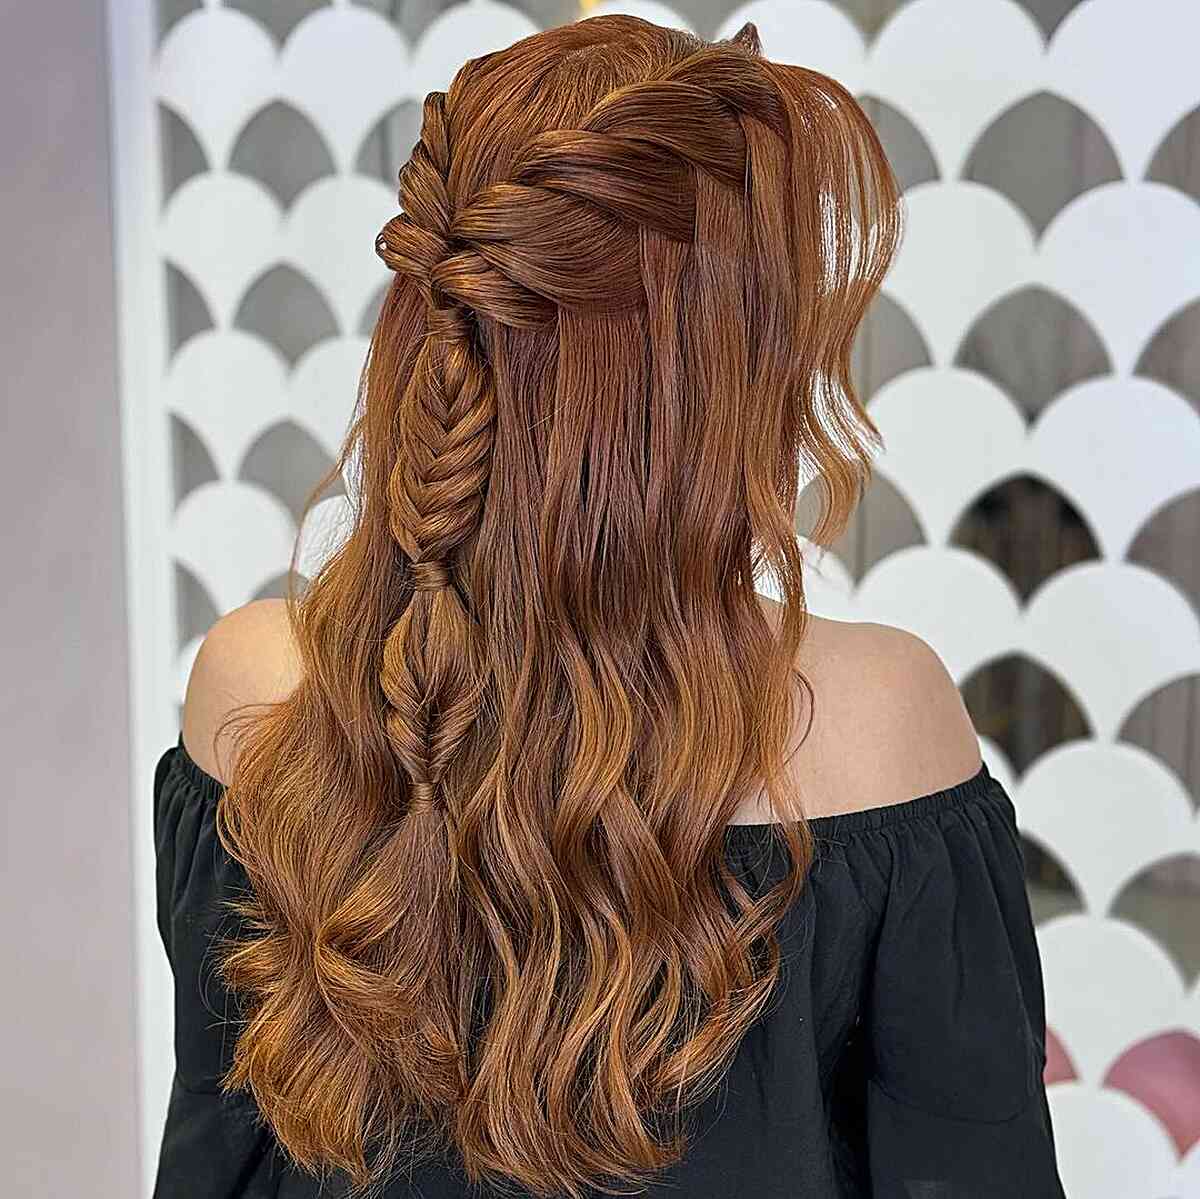 Gala-Inspired Braided Half Updo with Soft Waves for Longer Hair